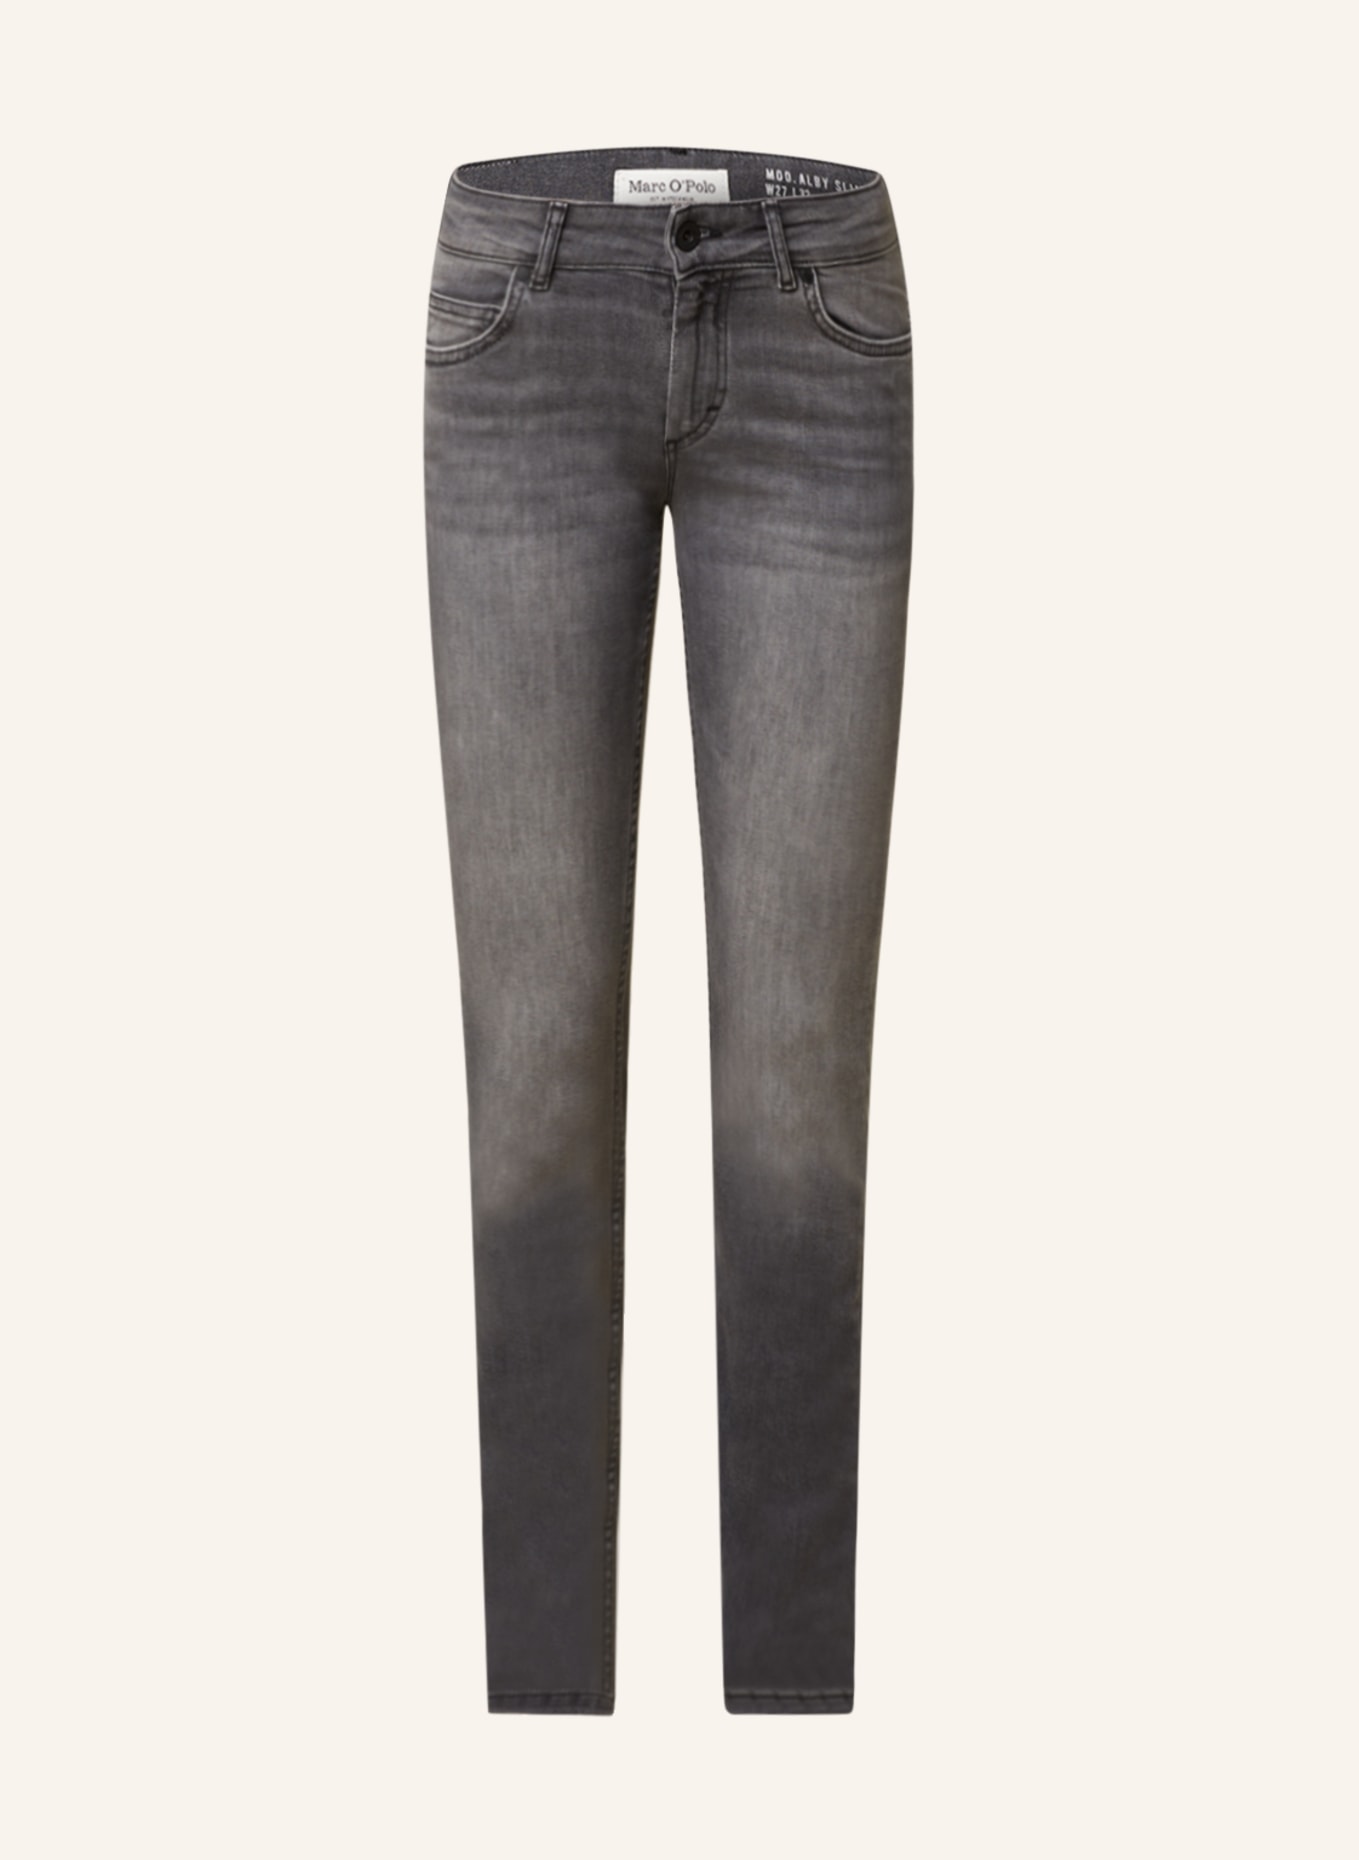 Marc O'Polo Skinny jeans, Color: 008 Comfort mid grey wash (Image 1)